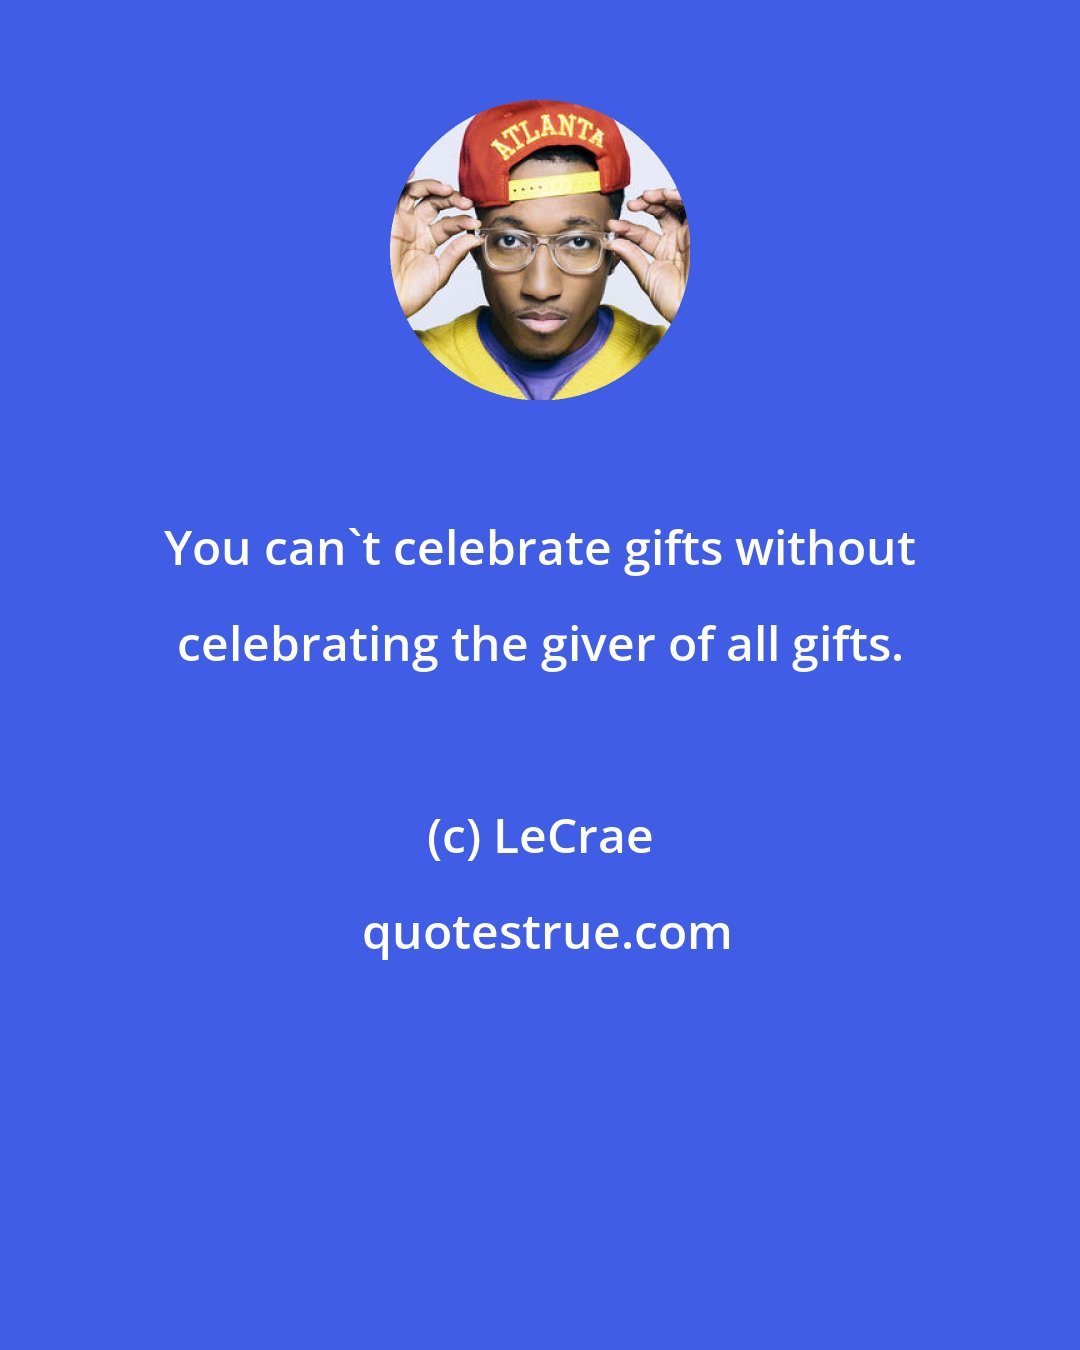 LeCrae: You can't celebrate gifts without celebrating the giver of all gifts.